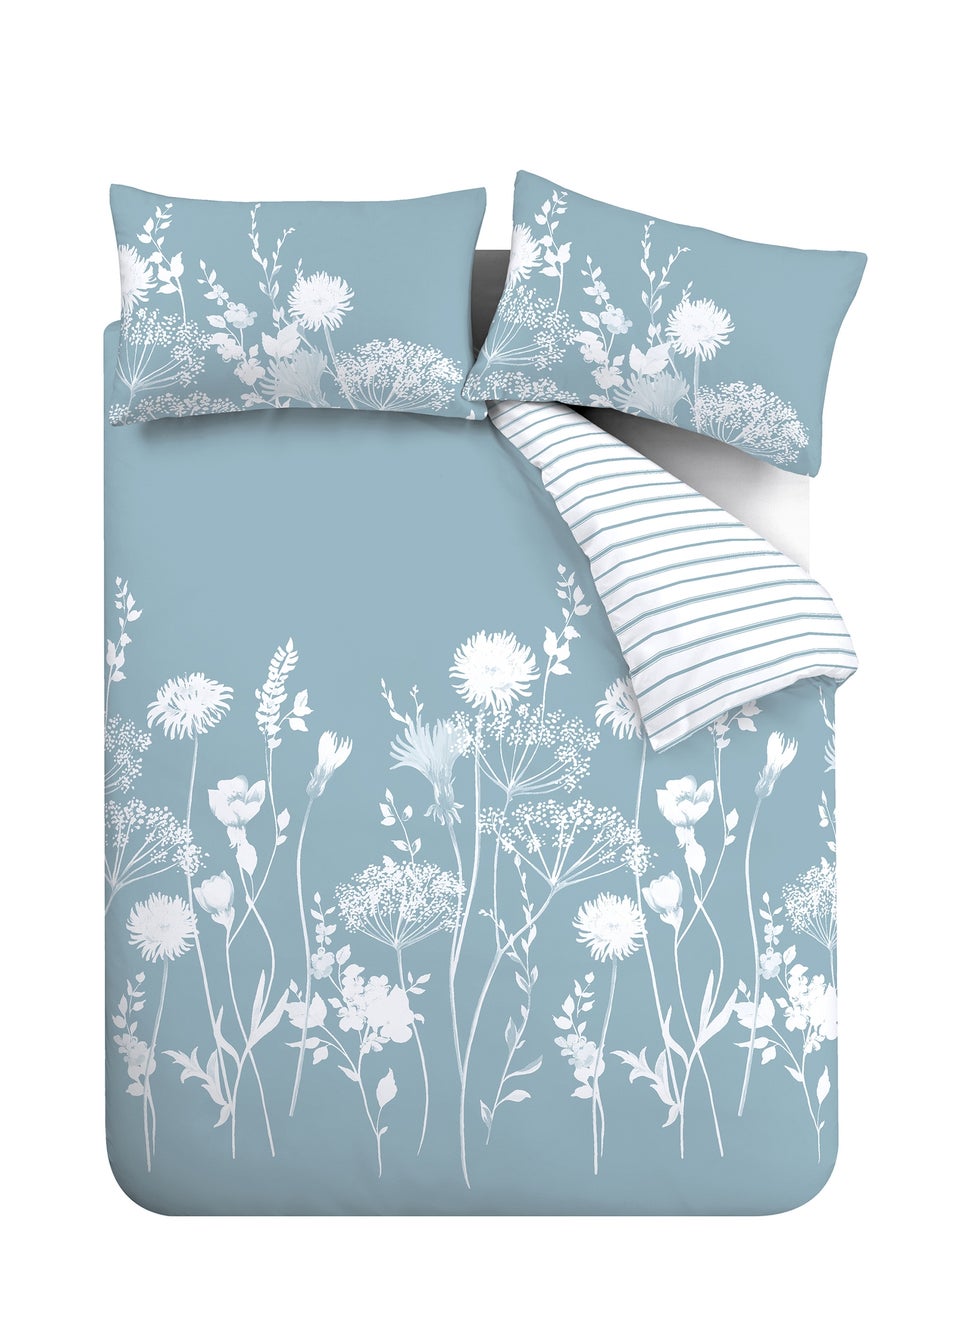 Catherine Lansfield Meadowsweet Floral Reversible Duvet Cover Set